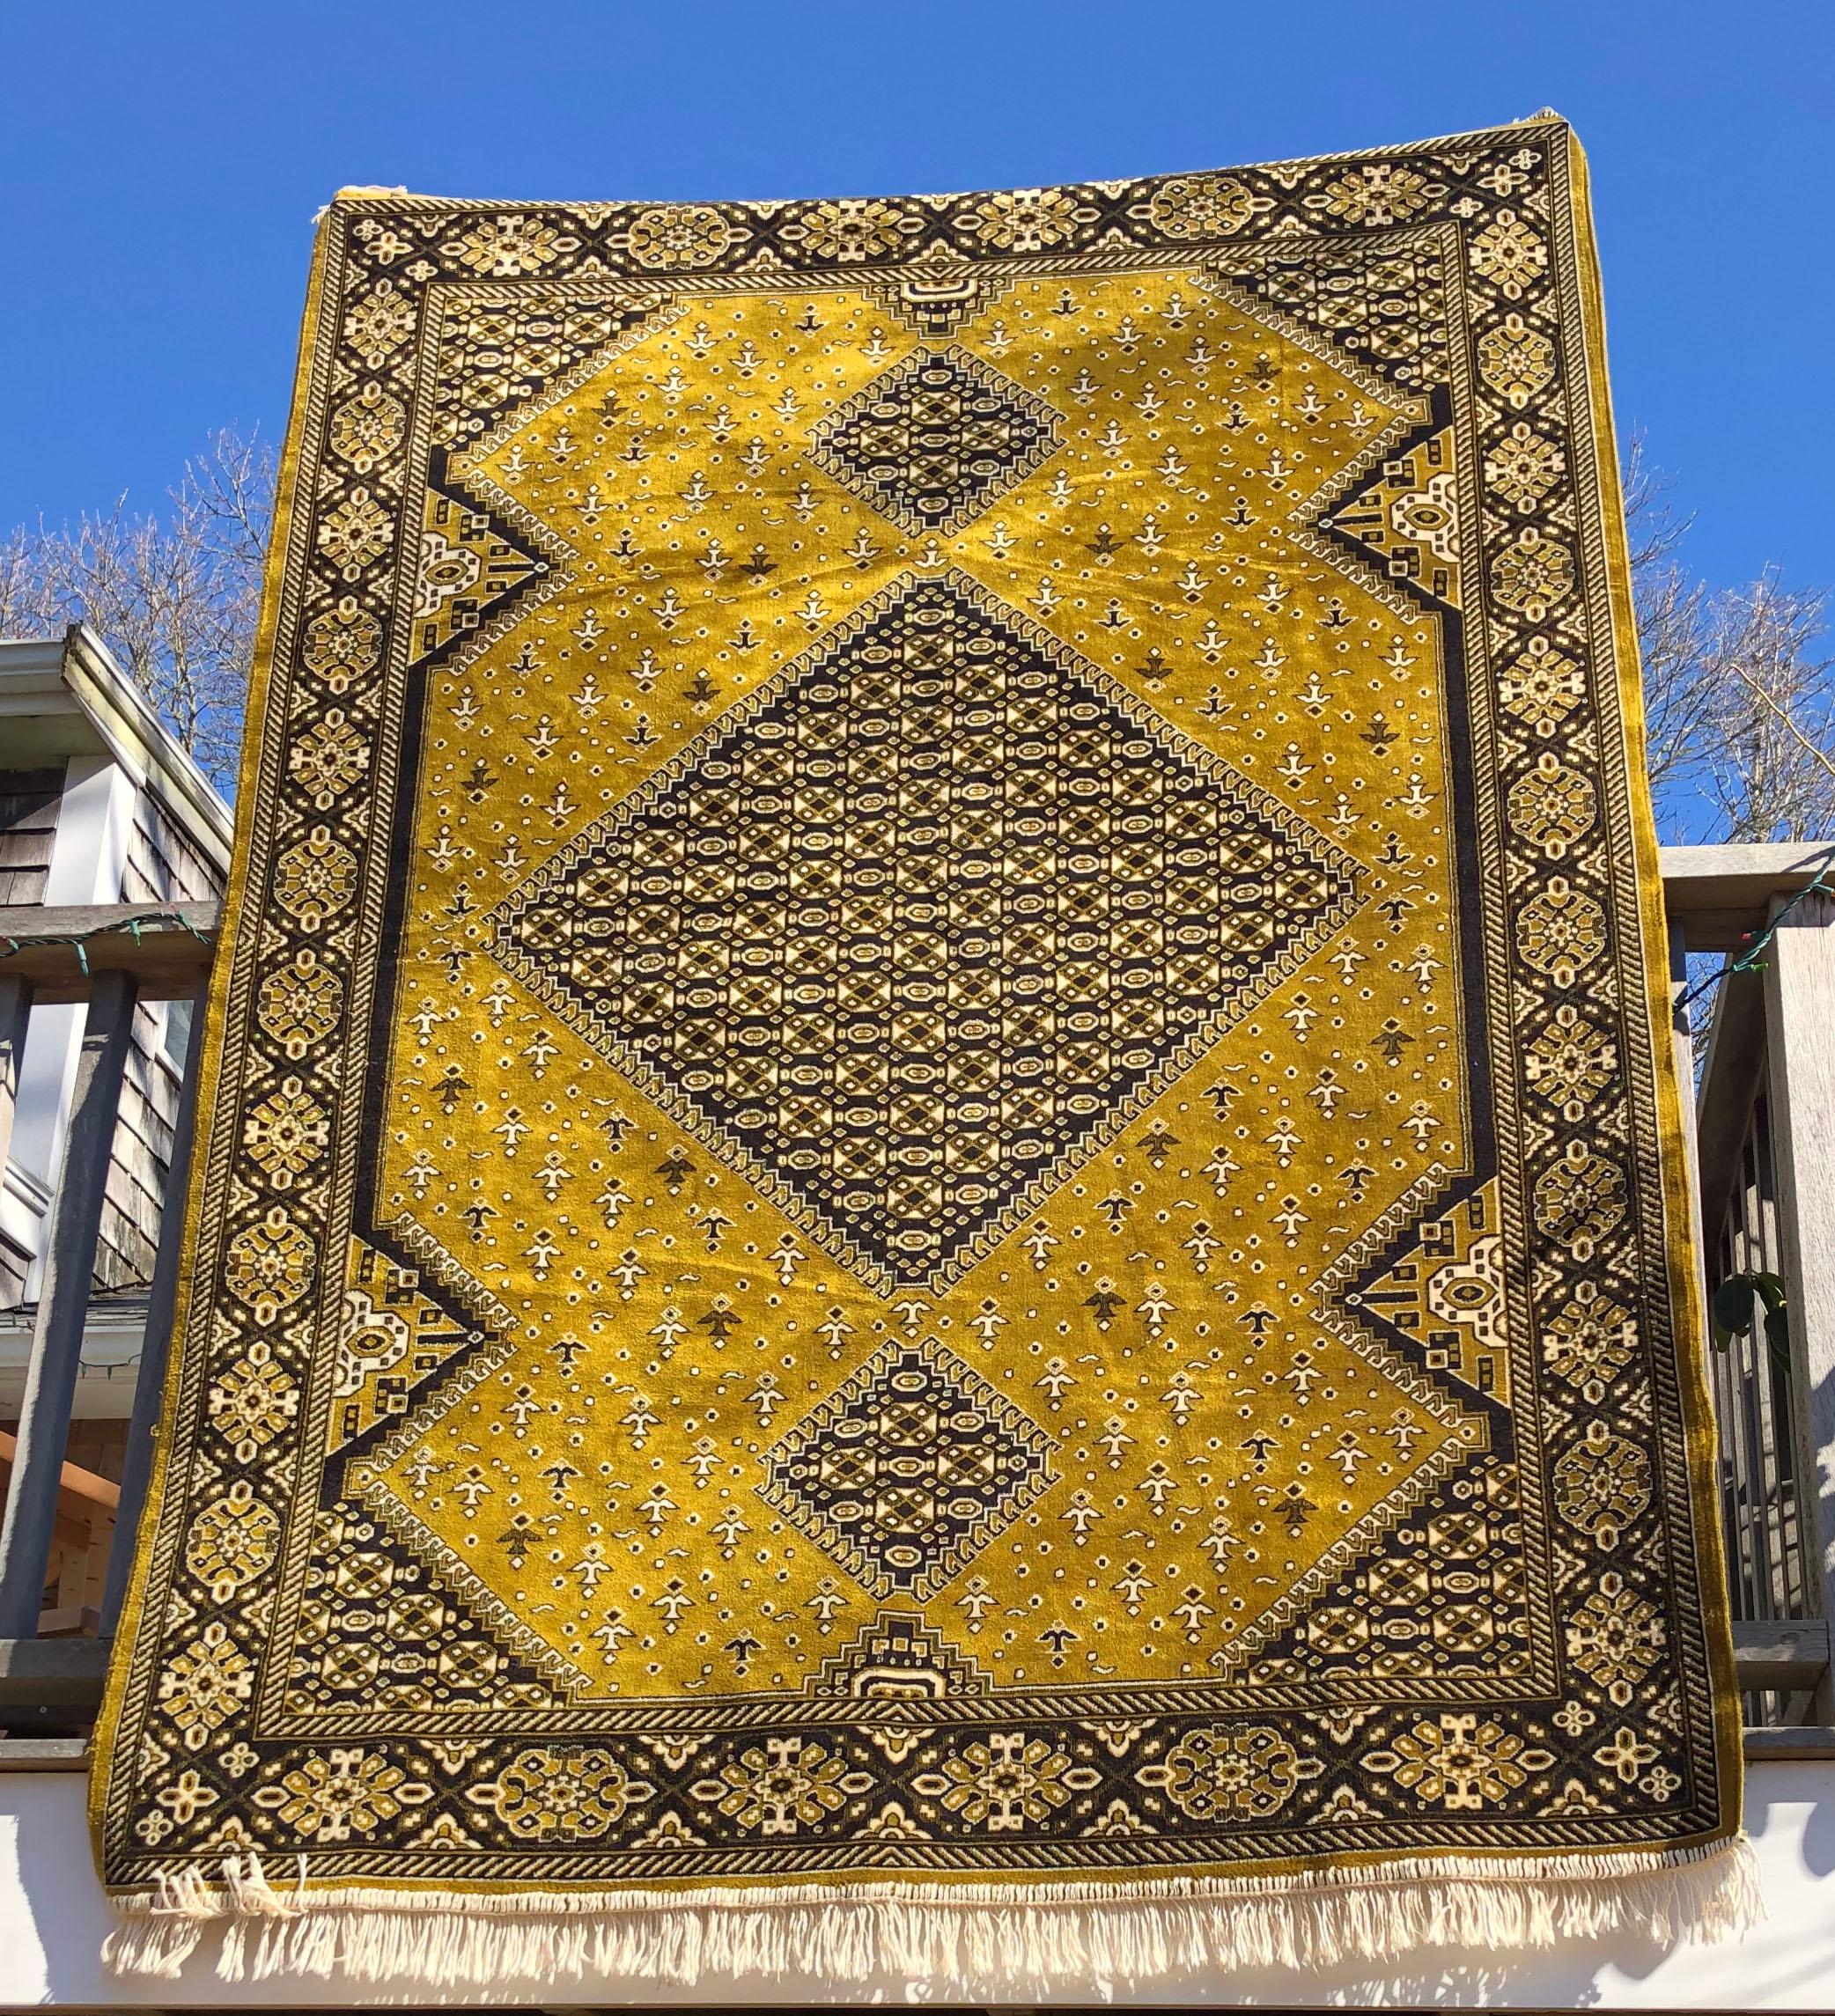 This gorgeous rug was acquired in the early 2000s at a women's co-operative in Ouarzazate, Morocco. It has exquisite construction and is very soft to the touch, silken velvet. It has a subtle sheen that changes in the light from gold to